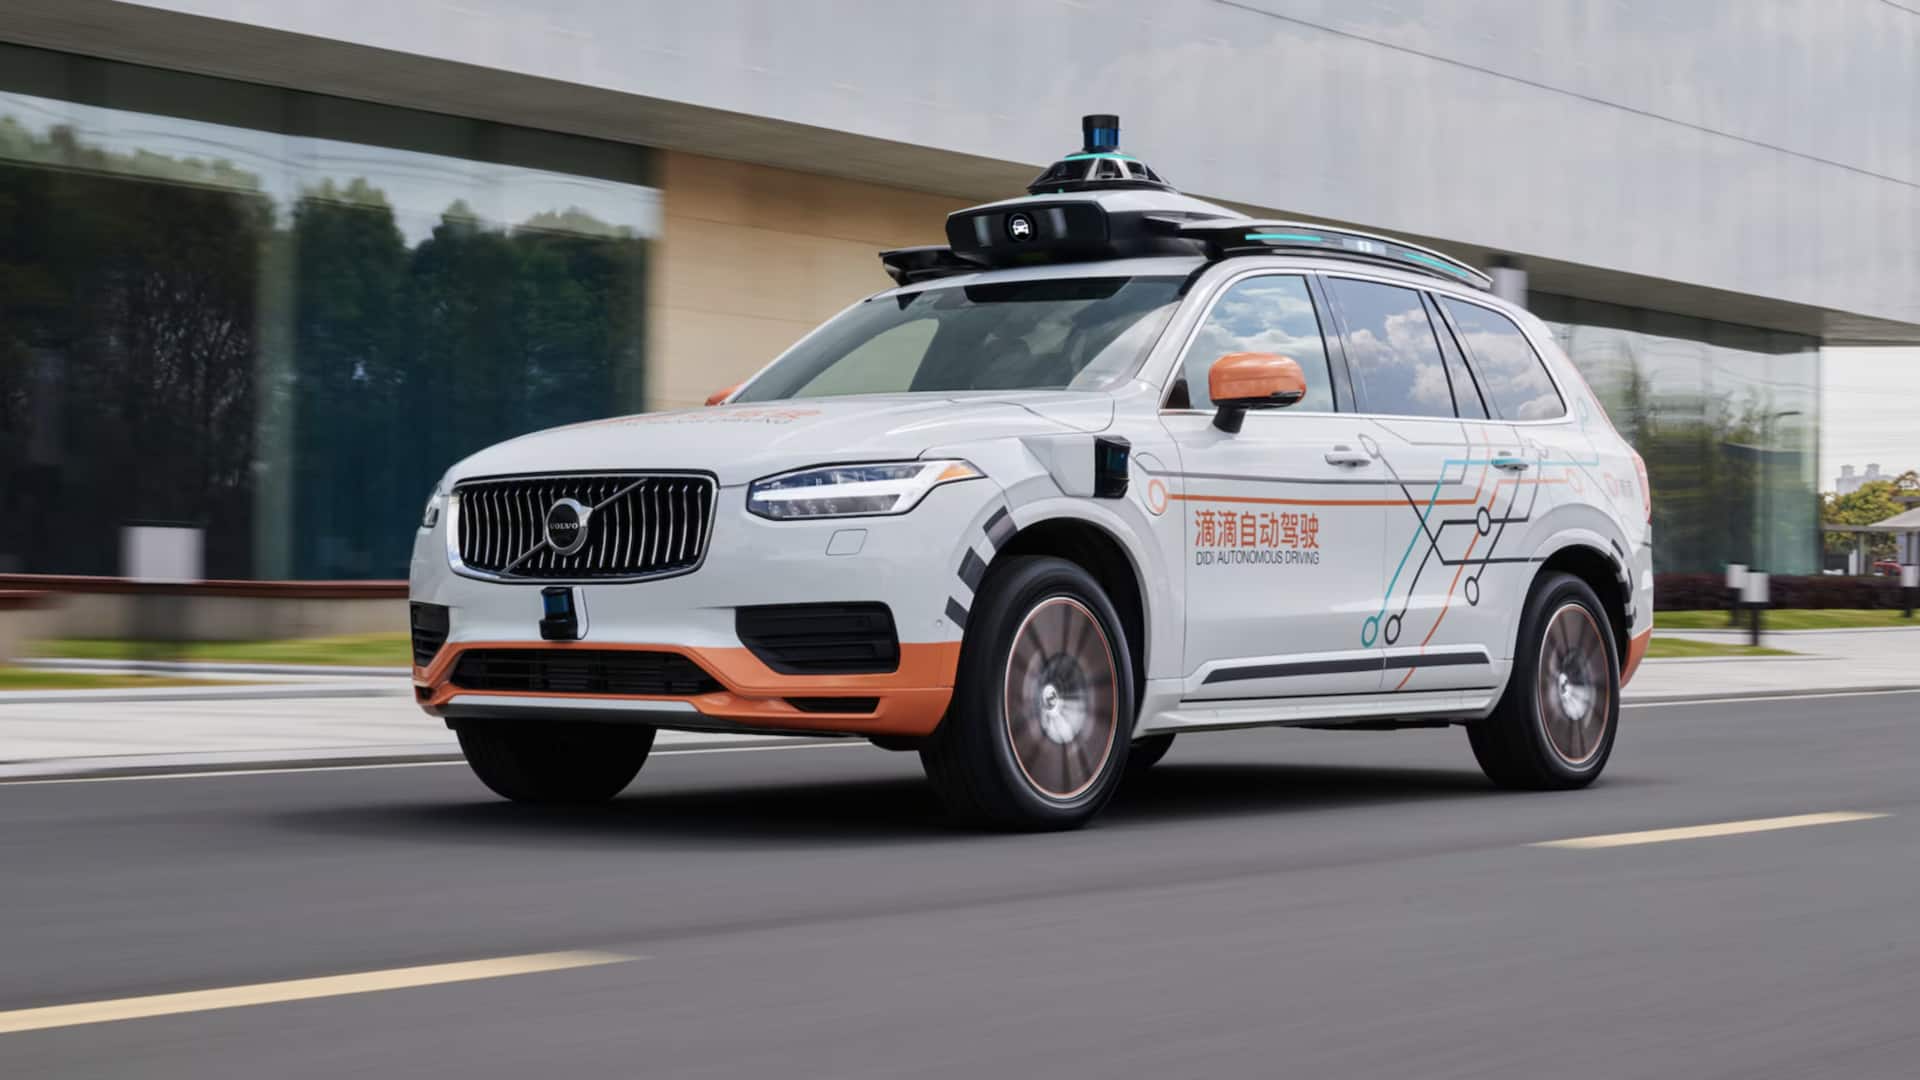 China's DiDi, GAC Aion partner to launch robotaxis by 2025